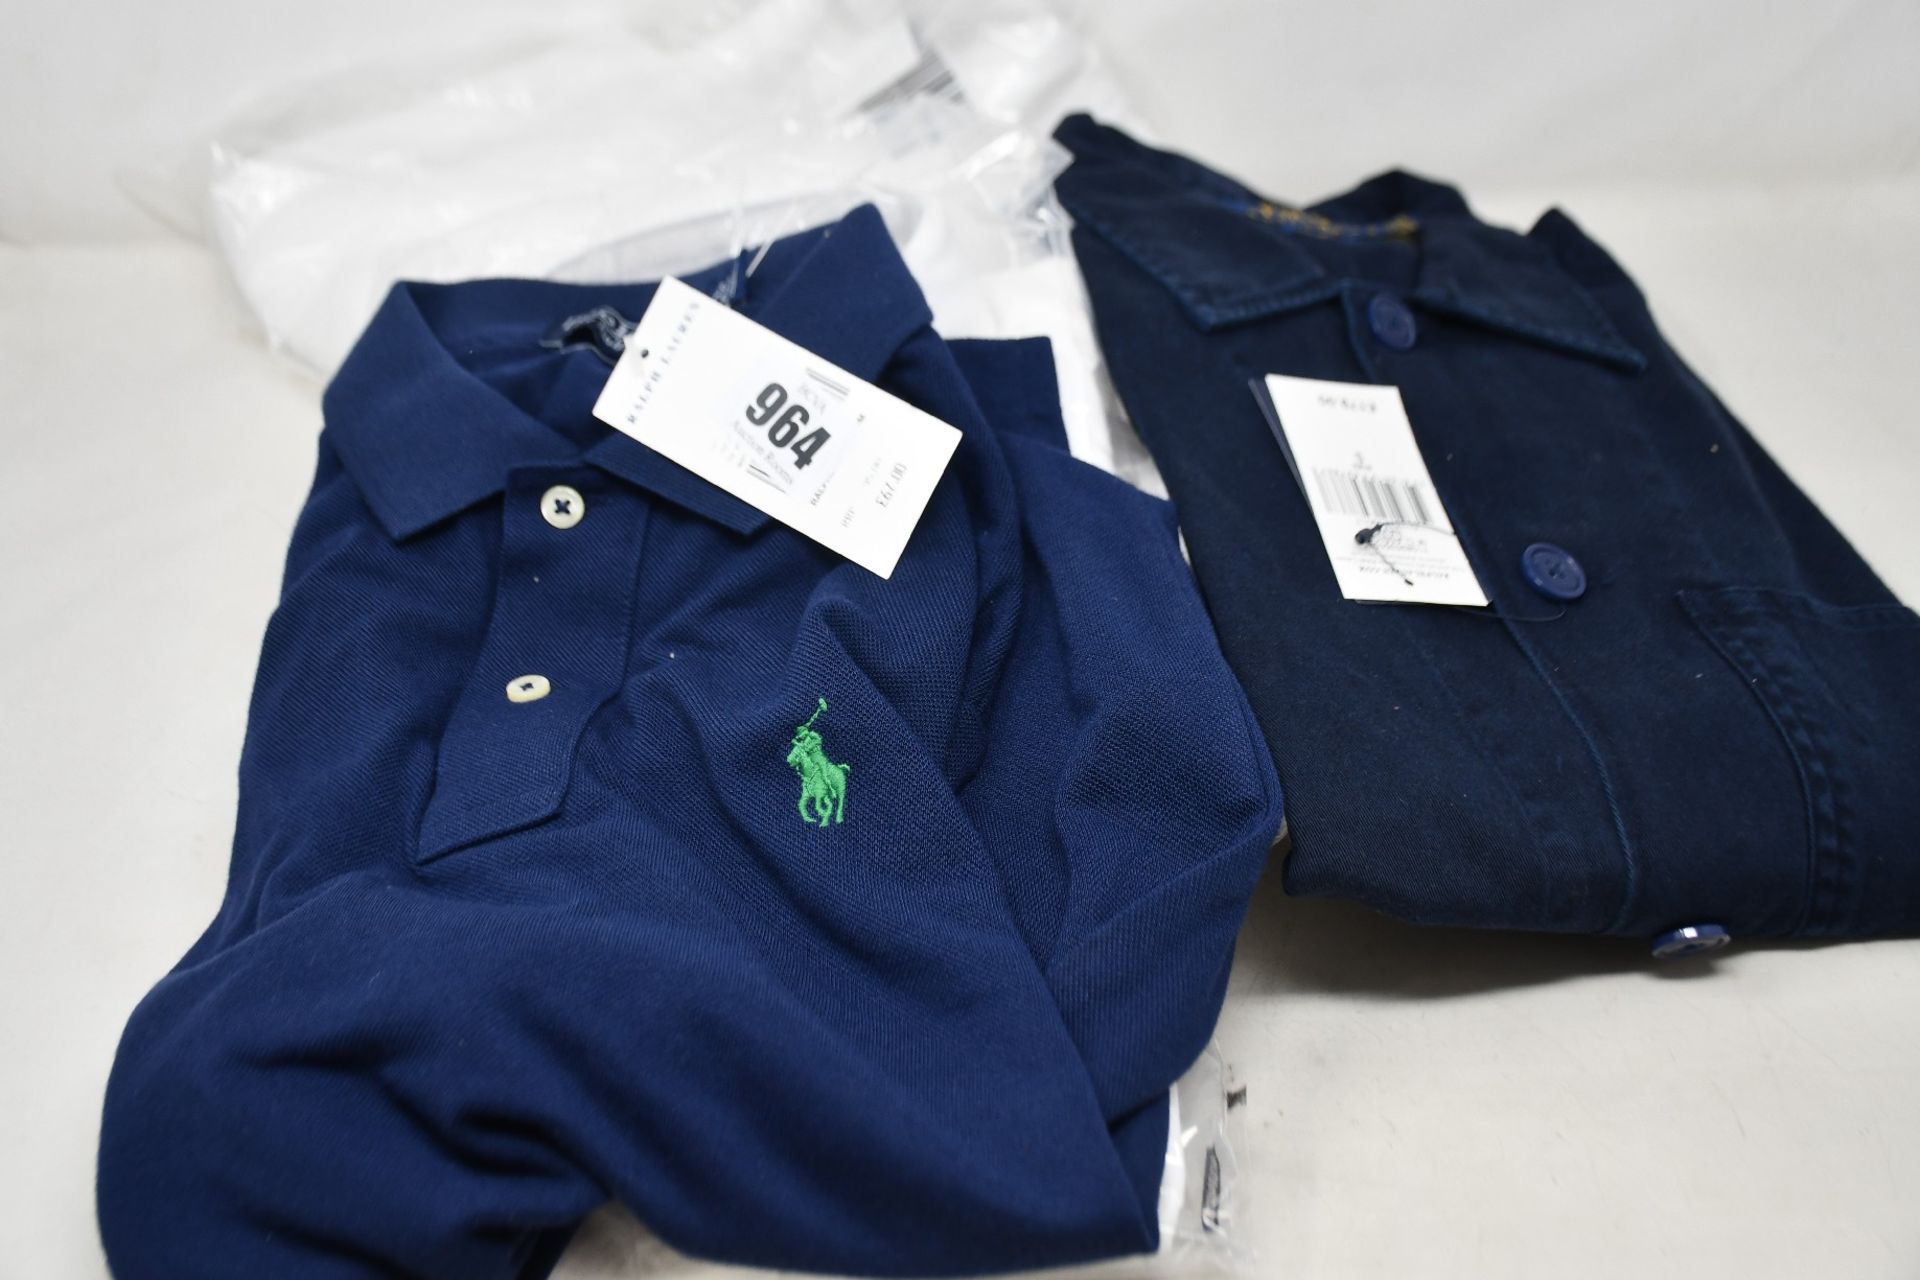 Two as new Ralph Lauren shirts, a polo shirt and a hoodie (All S).